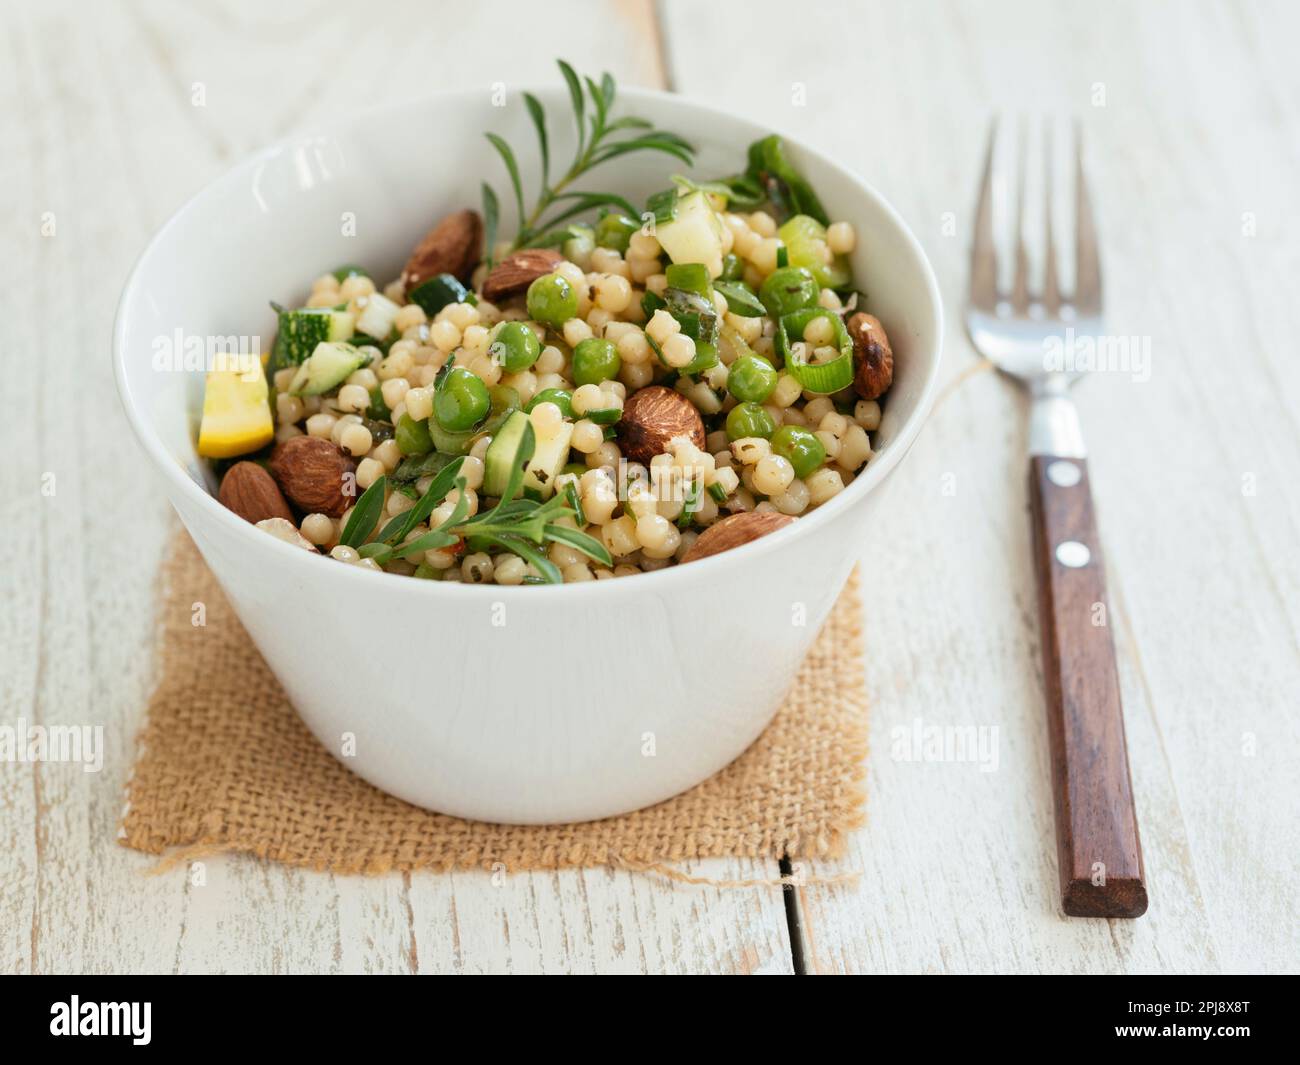 Bowl with a pearl couscous salad with peas, zucchini and almonds. Stock Photo